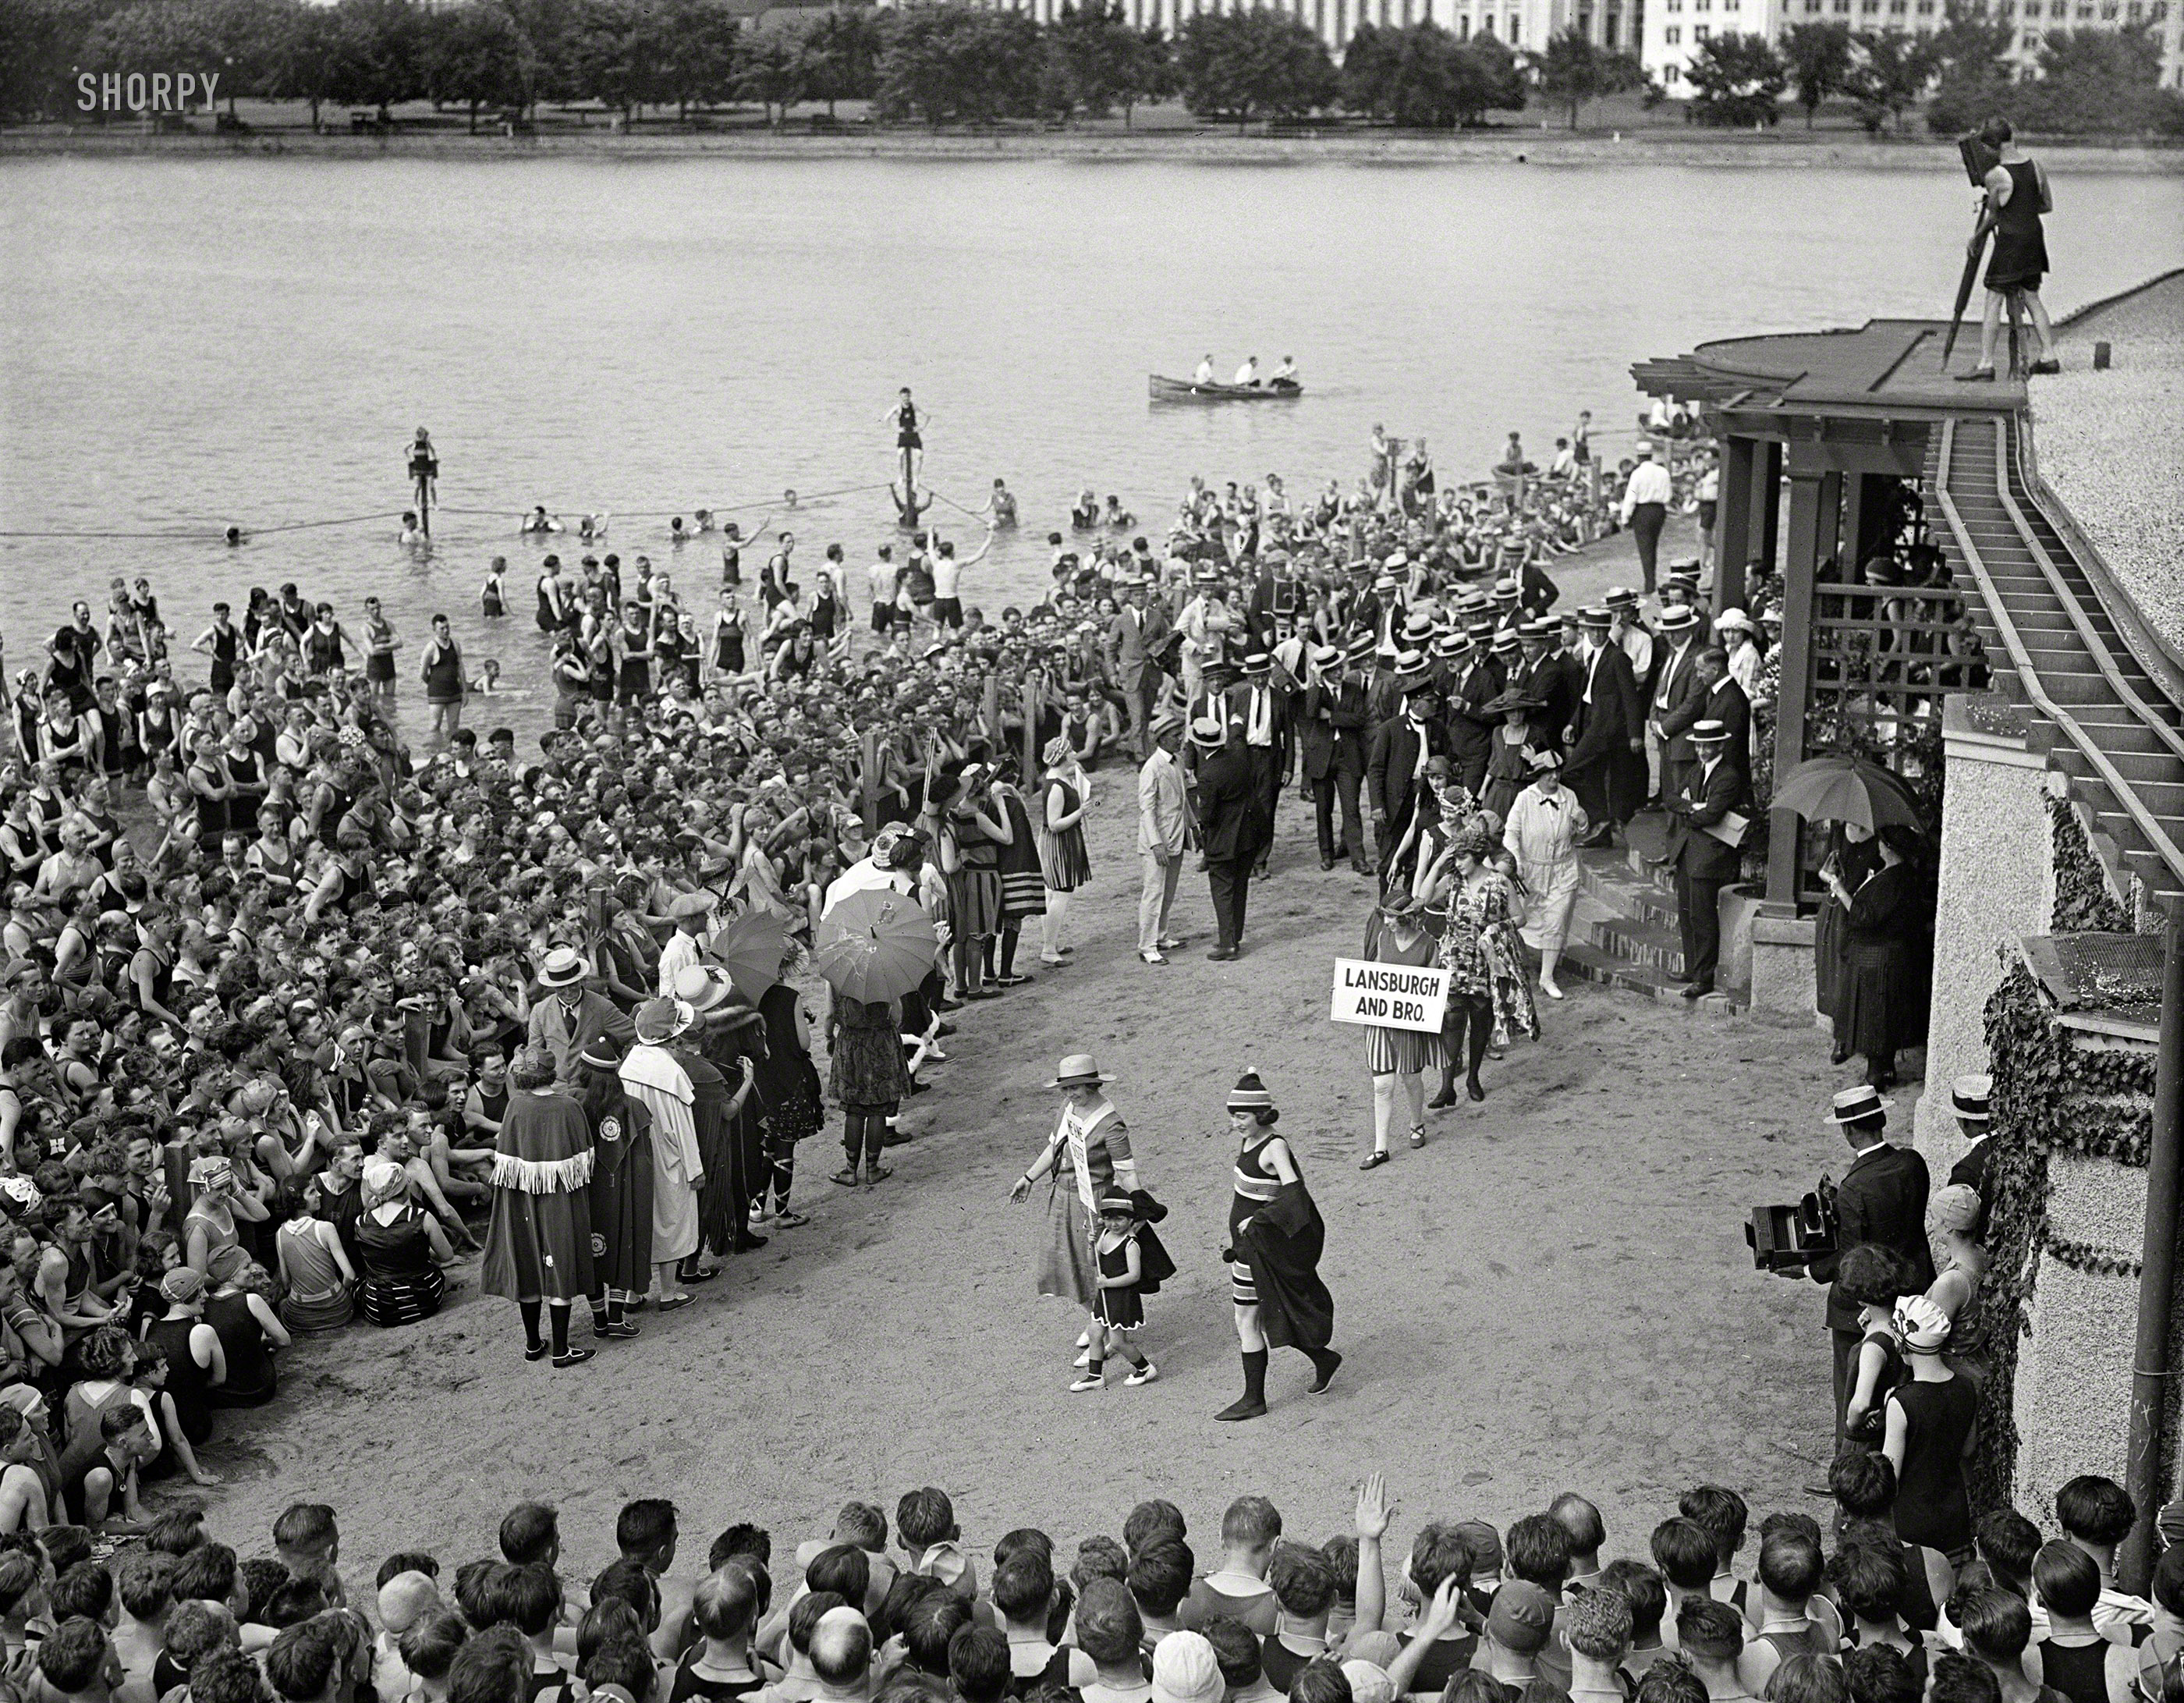 June 17, 1922. Washington, D.C. "Washington Advertising Club bathing beauty contest at Tidal Basin." Harris & Ewing Collection glass negative. View full size.
&nbsp; &nbsp; &nbsp; &nbsp; "Quintet of beauties wore the models of Lansburg & Brother, which captured first prize in the store competition." Caboose of the quintet is Miss Iola Swinnerton, First Lady of Shorpy, who took second in the individual costume contest. Read all about it here.